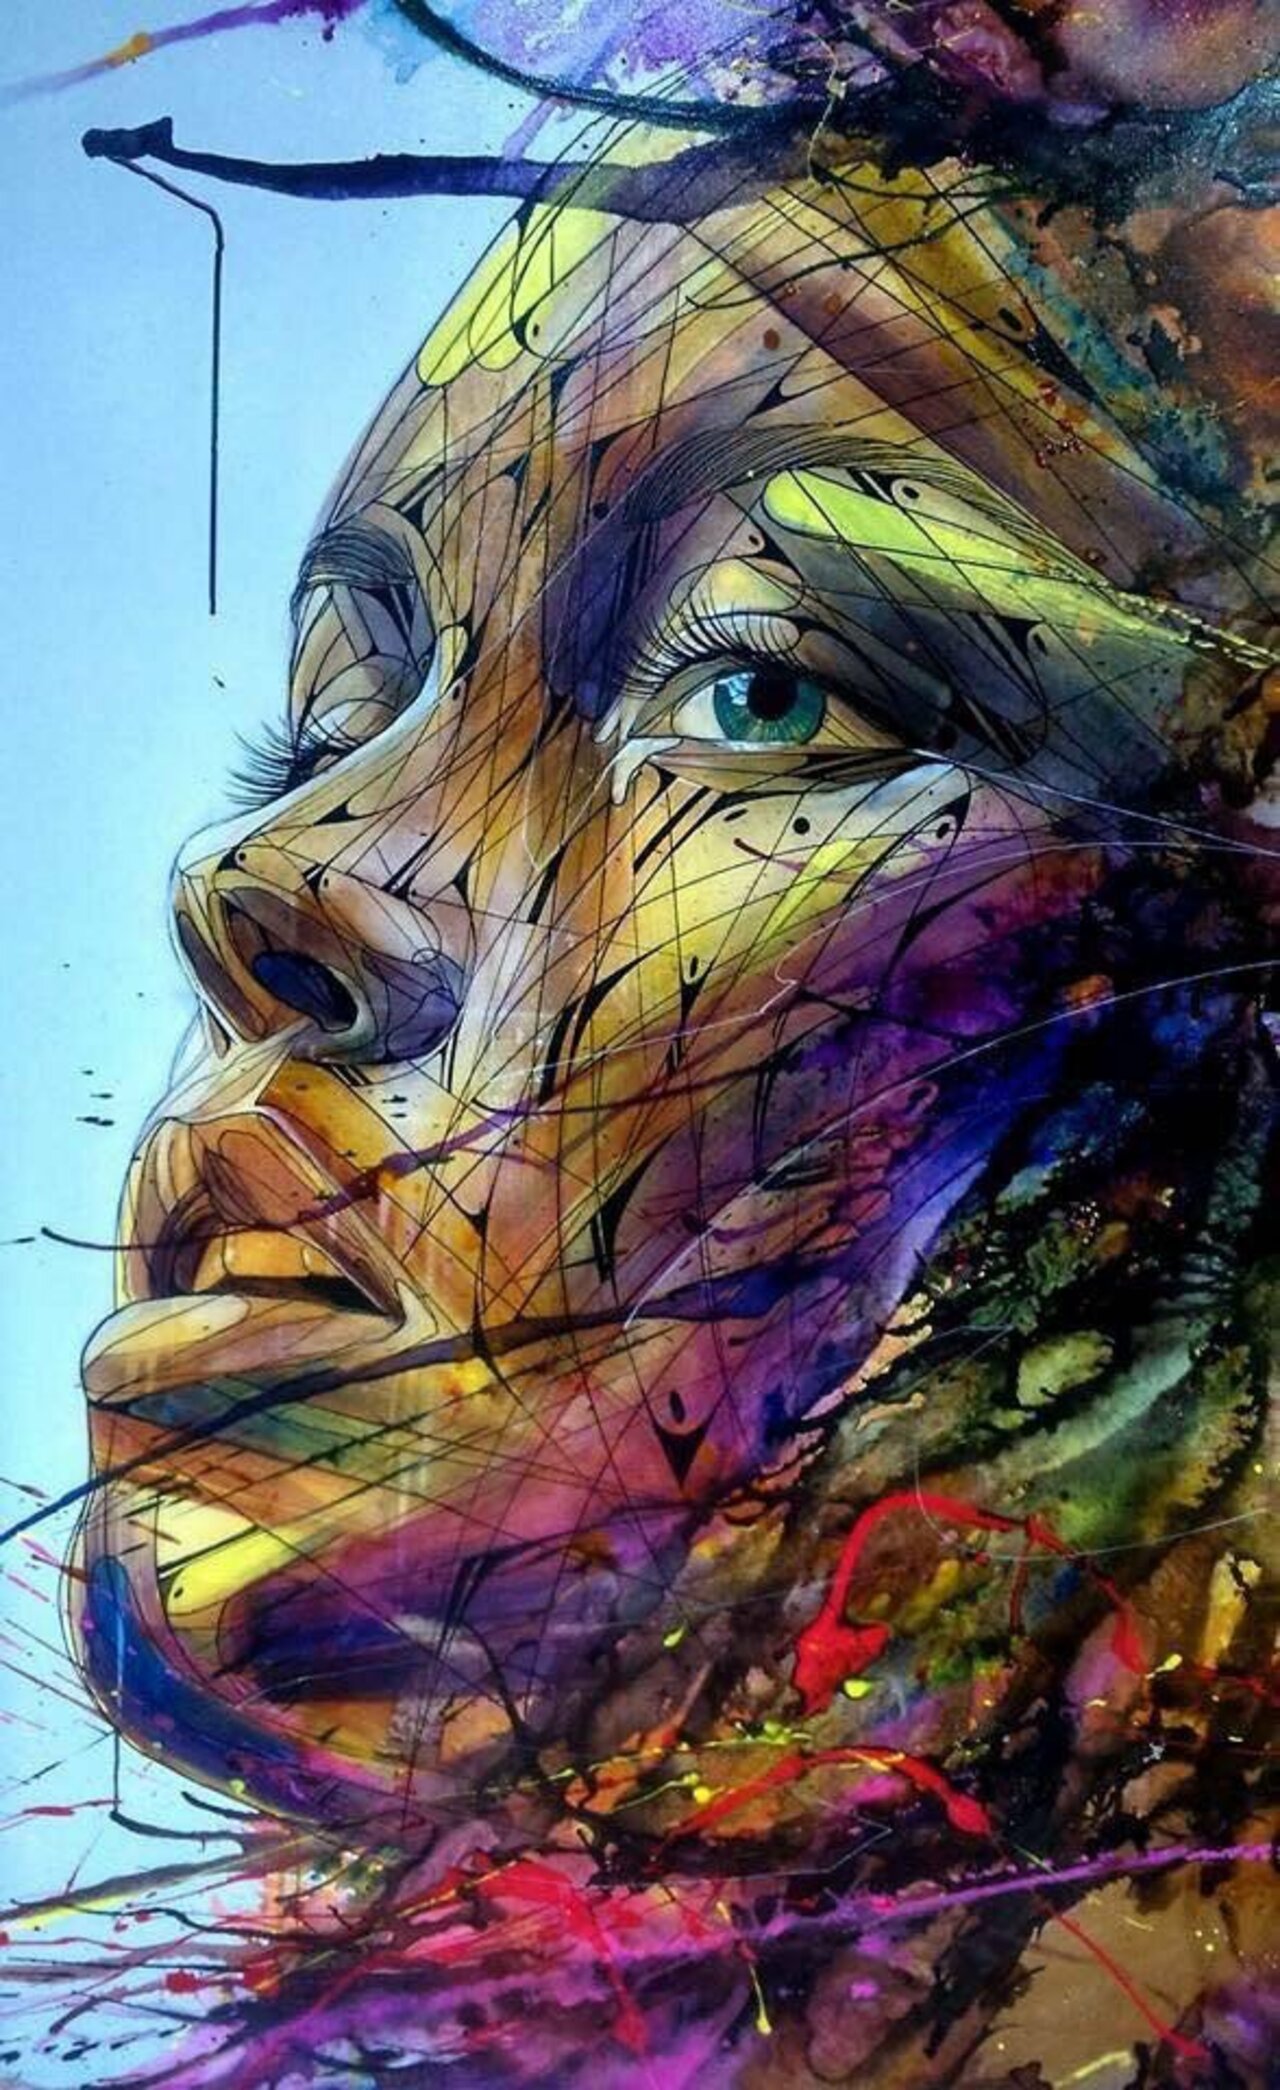 Colorful eyes, beauty lines - by HOPARE - @alexhopare#art #streetart #colors #raw #beauty http://beartistbeart.com/2016/10/24/colorful-eyes-beauty-lines-by-hopare https://t.co/qzmOBGRBRV